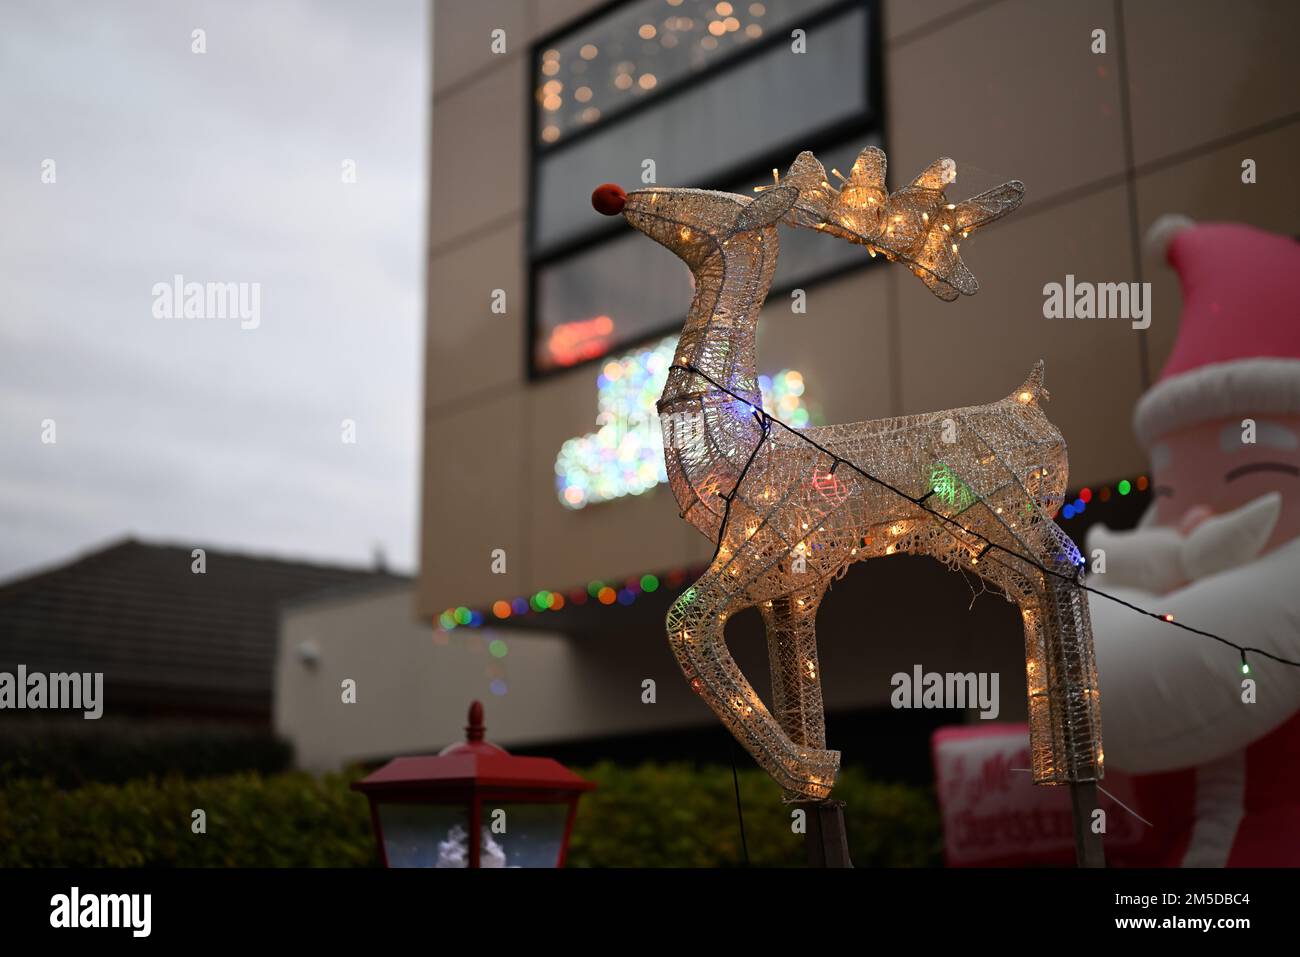 Illuminated suburban Christmas display featuring Rudolph the red-nosed reindeer, with other festive elements, such as Santa, in the background Stock Photo